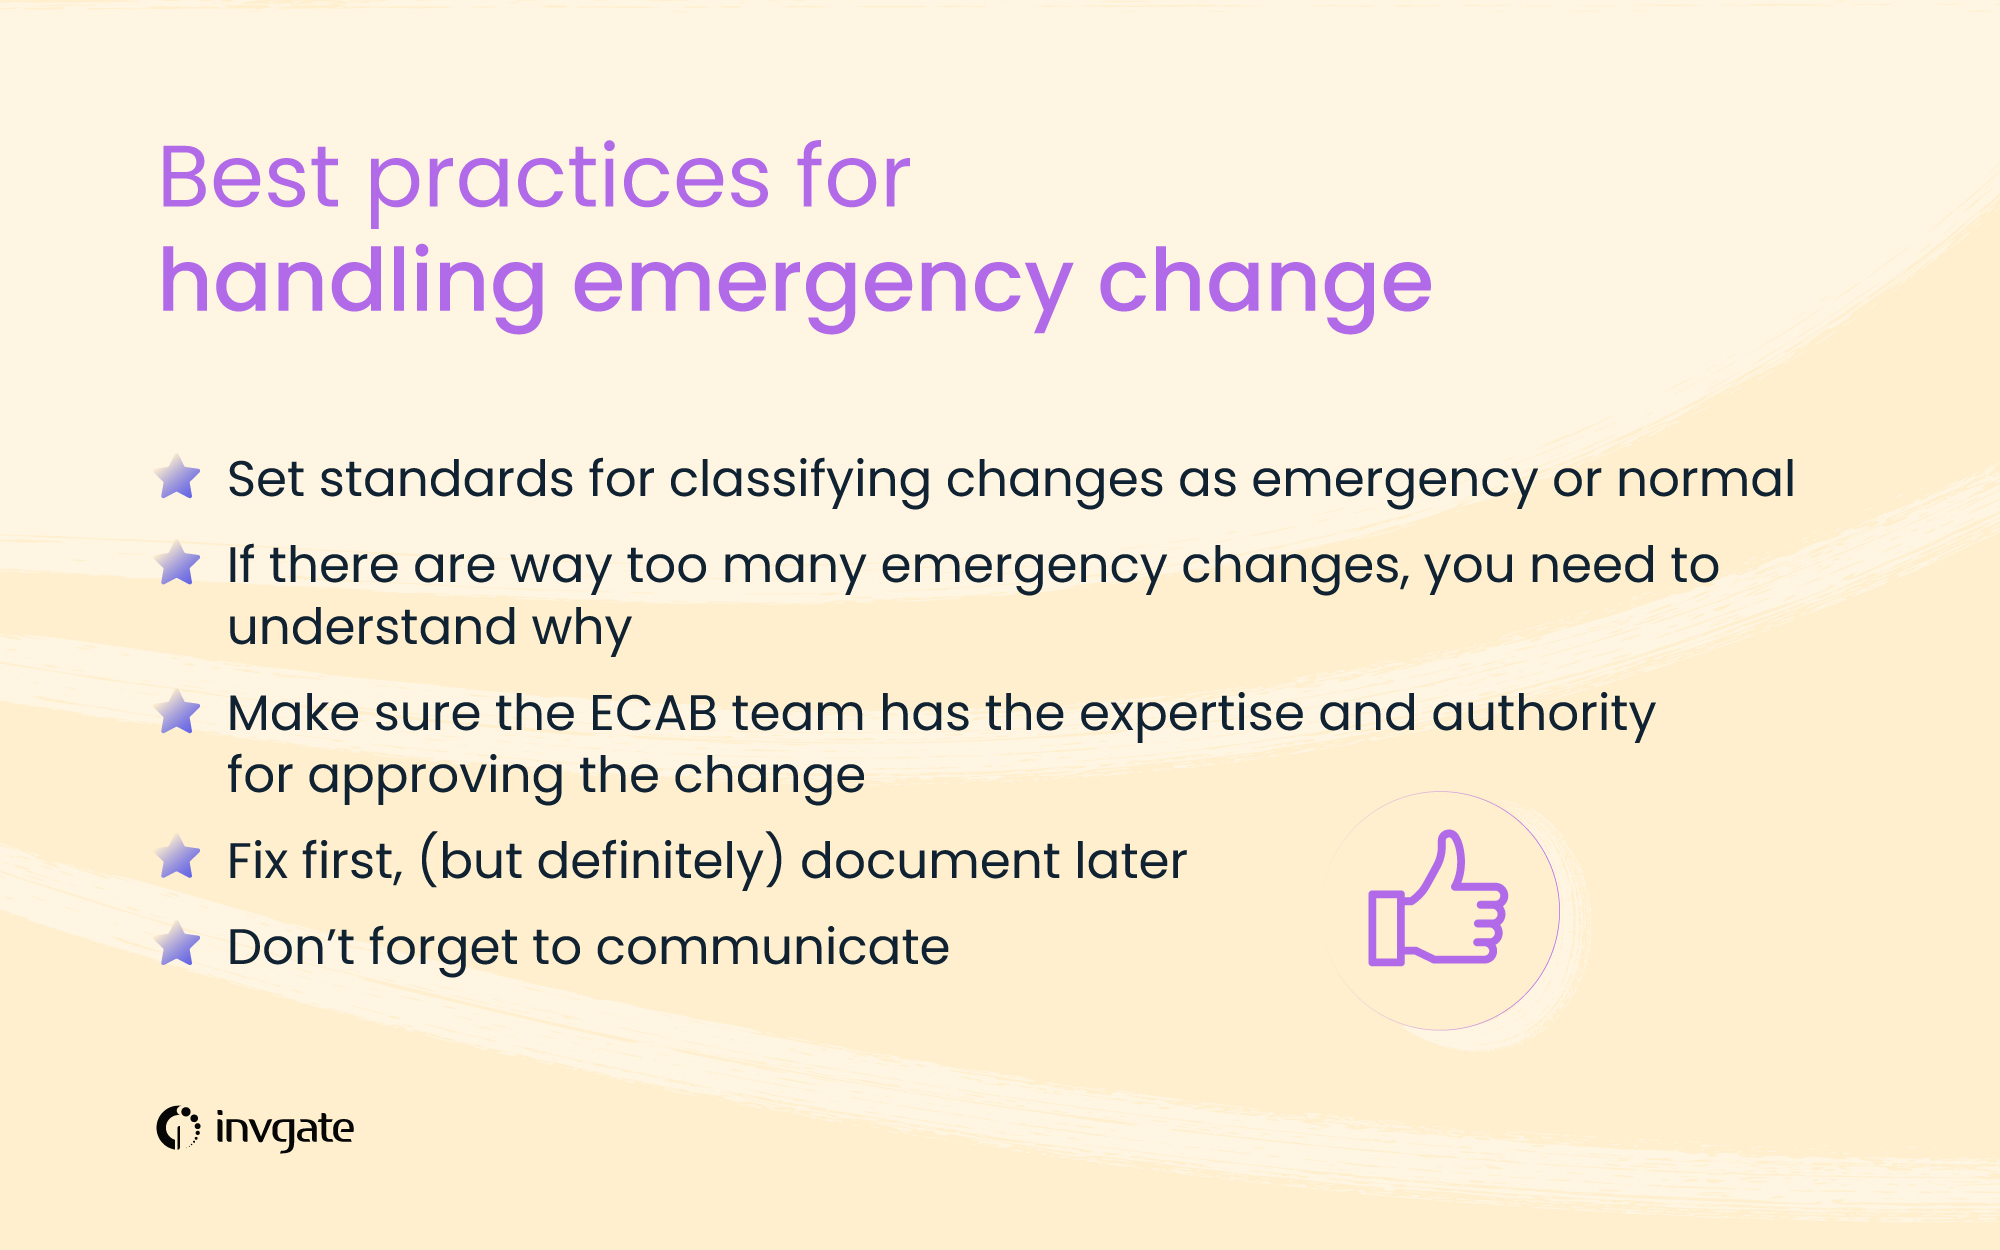 Best practices to follow for an emergency change